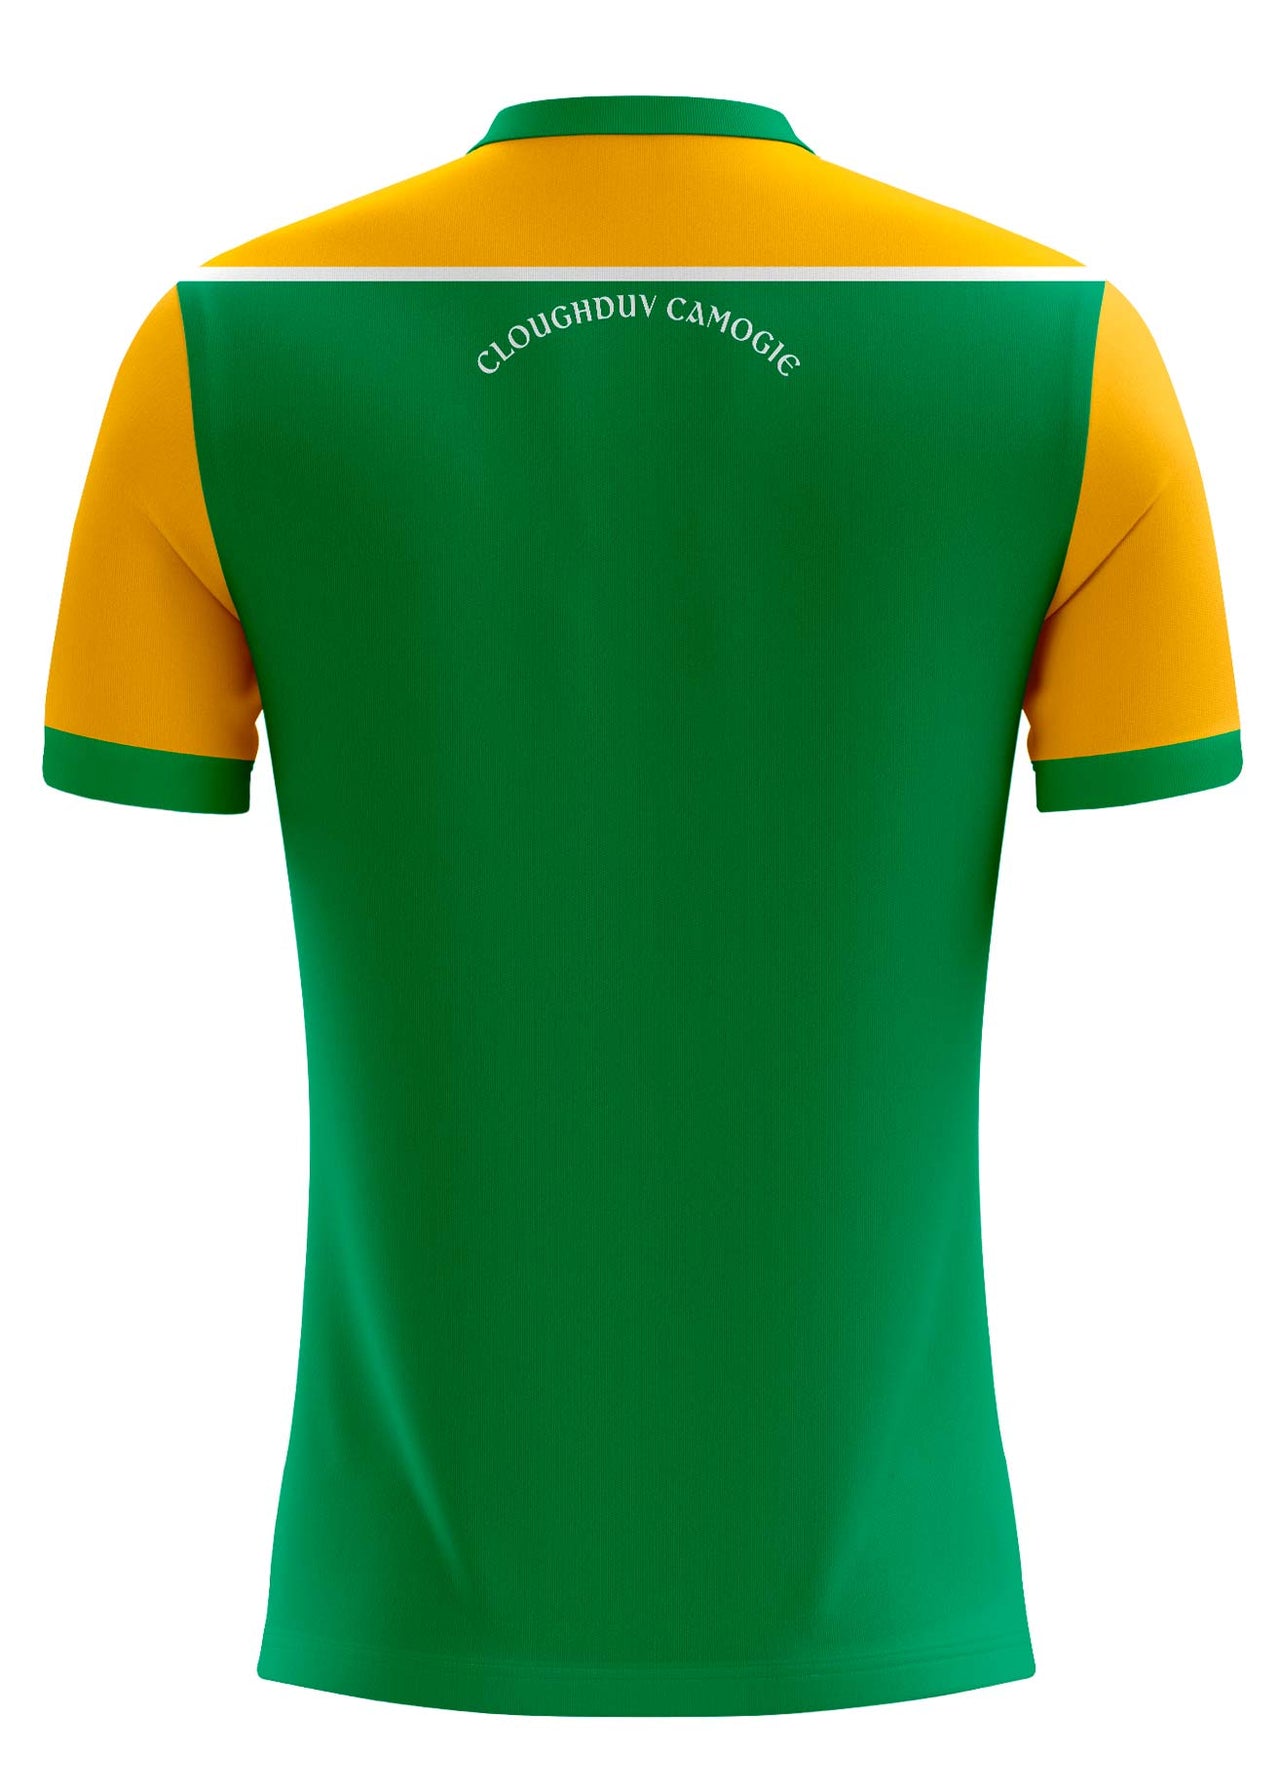 Cloughduv Camogie Home Jersey Player Fit Adult